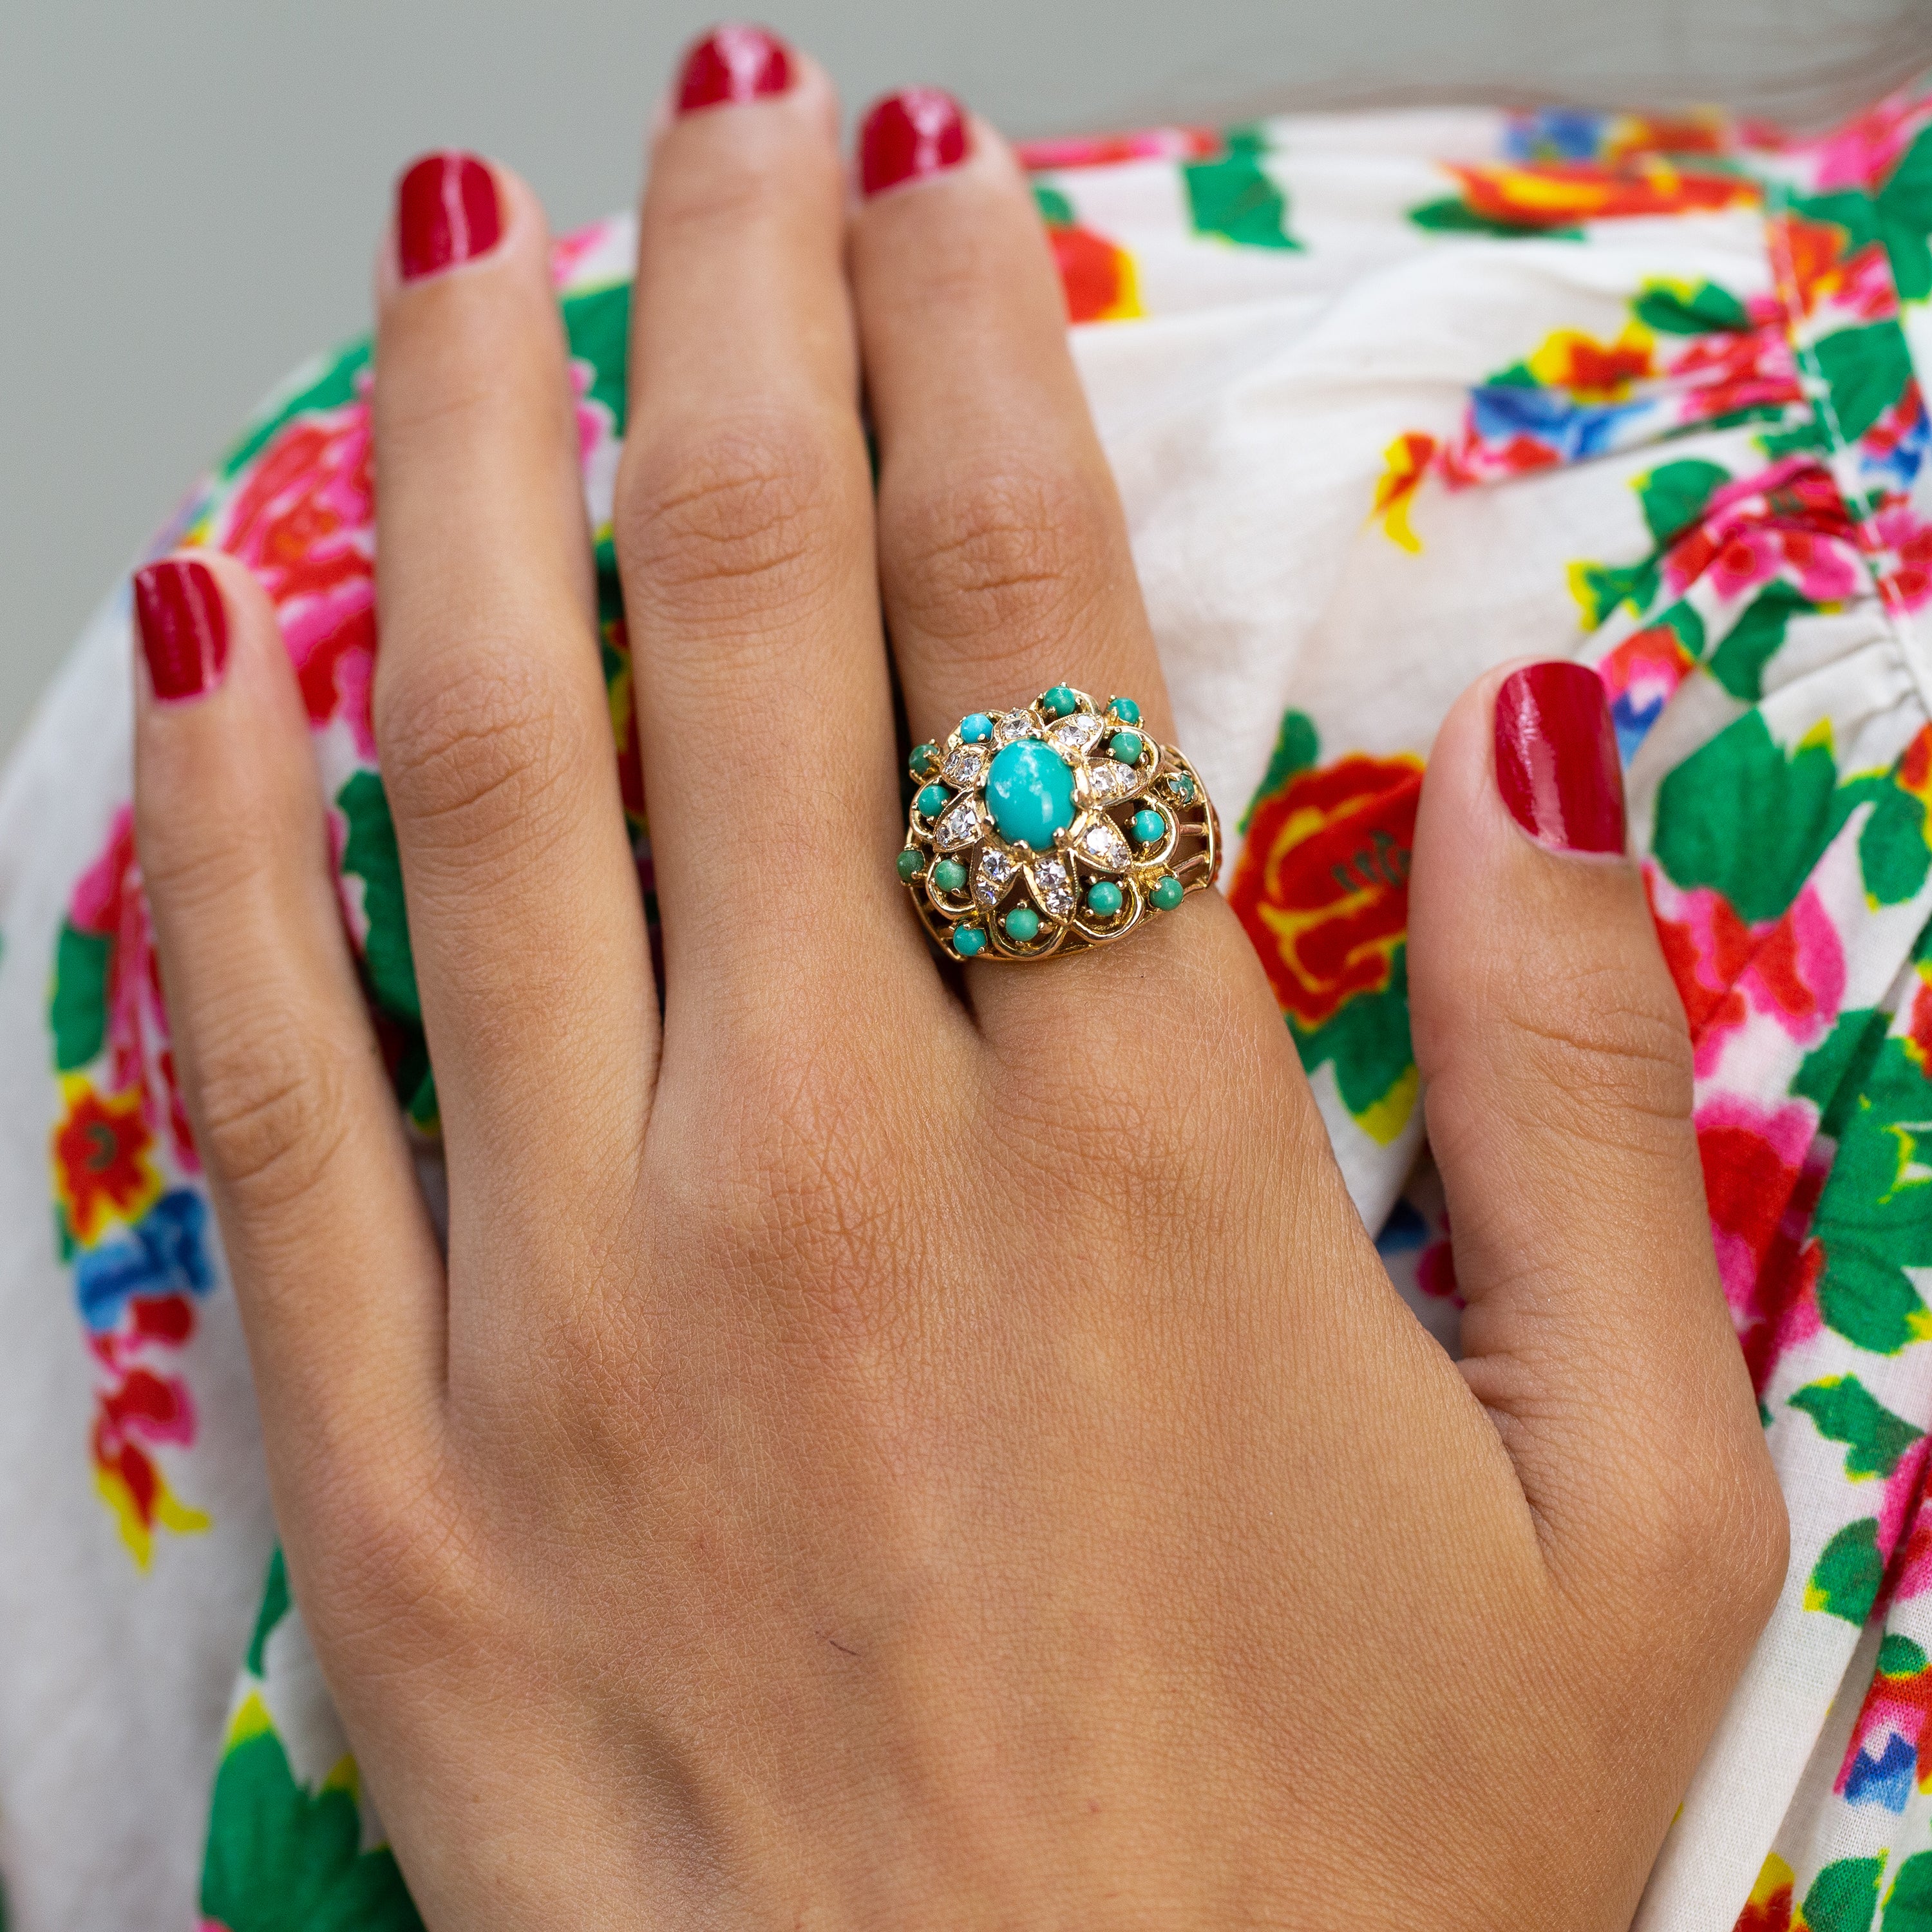 Turquoise, Diamond, and 14k Gold Cocktail Ring